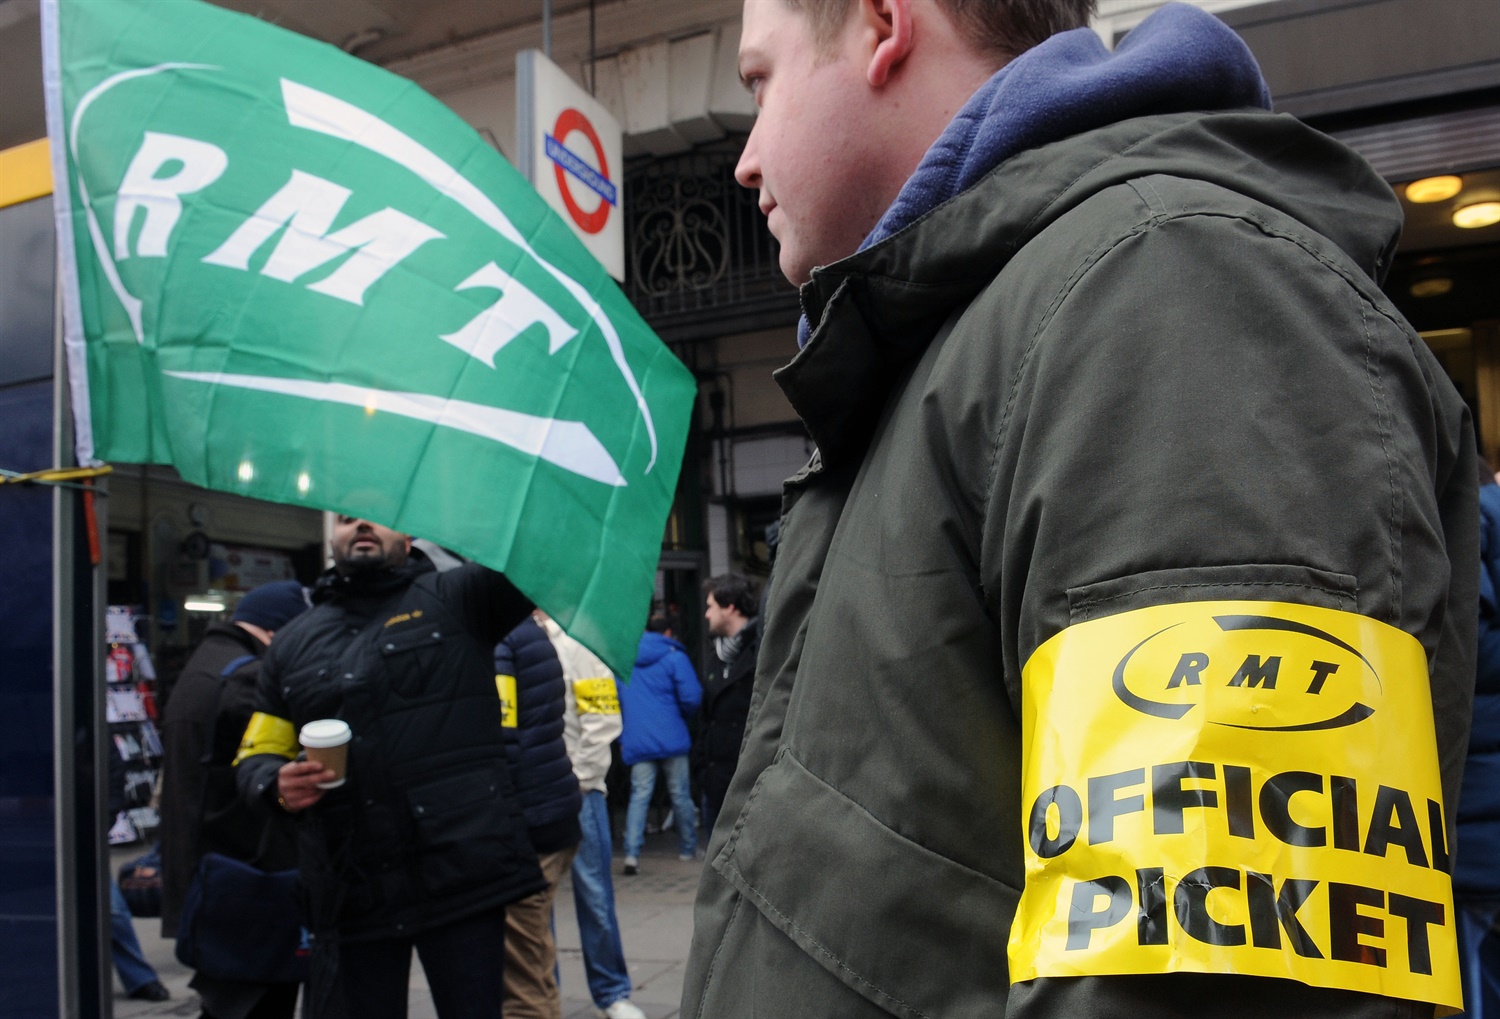 Merseyrail reveals reduced Grand National timetable to cope with RMT strike